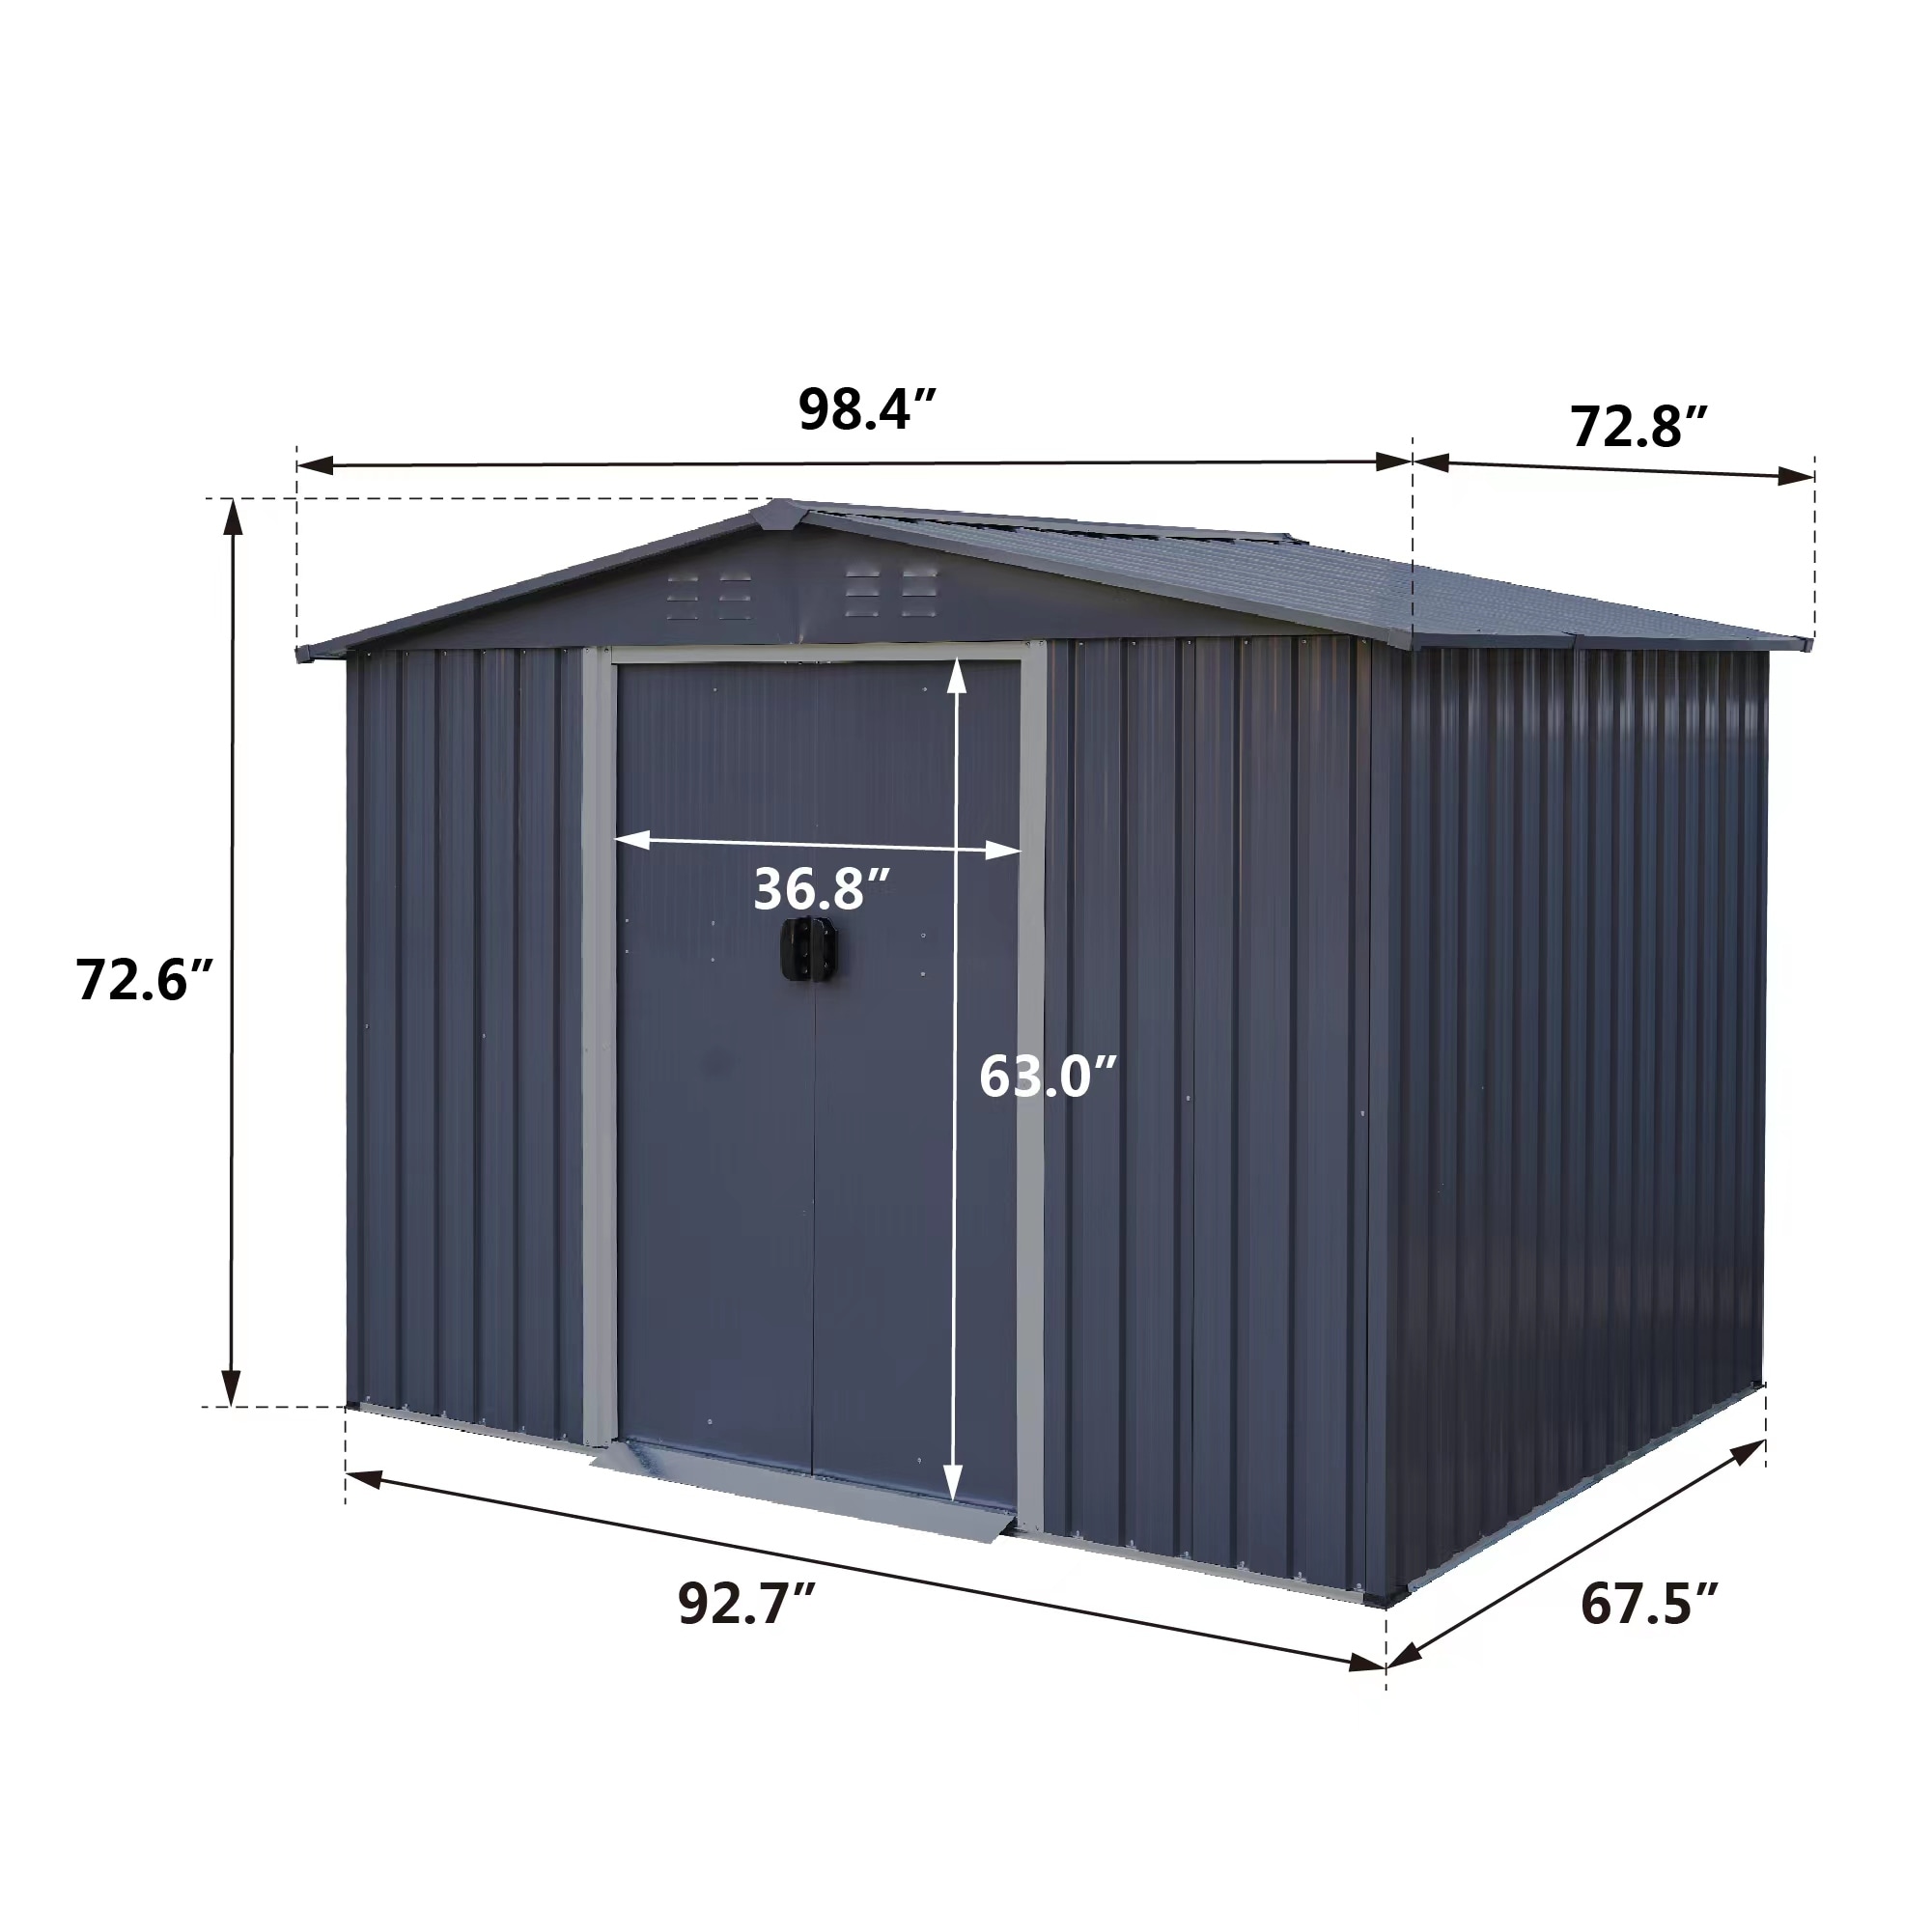 Maocao Hoom 7.72-ft x 5.62-ft Galvanized Steel Storage Shed in the ...